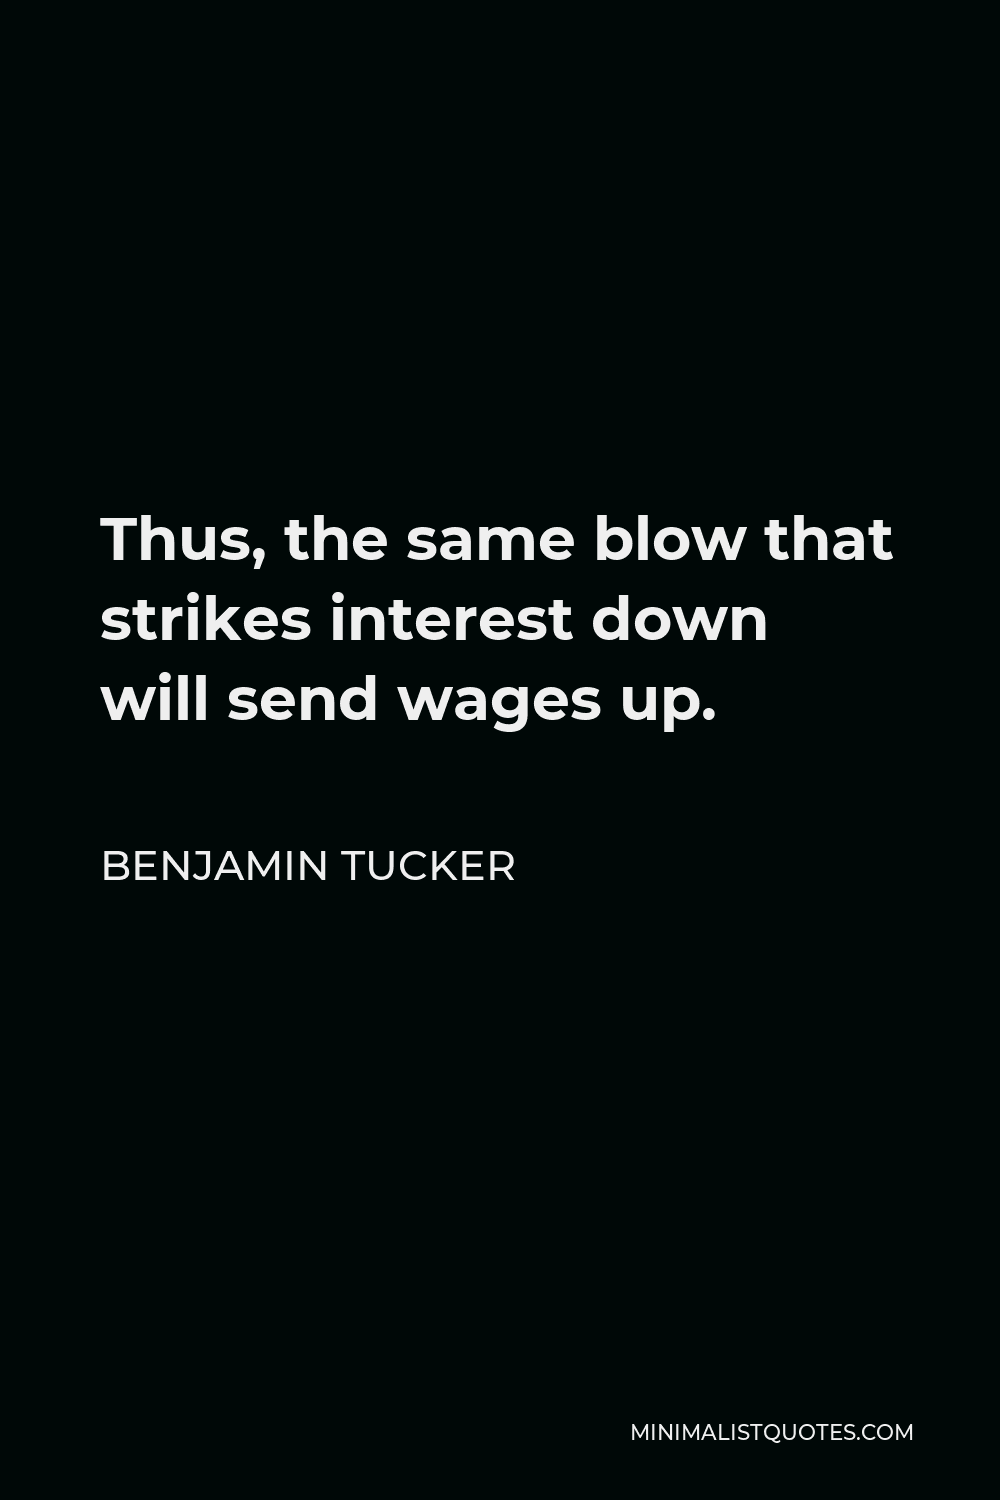 Benjamin Tucker Quote - Thus, the same blow that strikes interest down will send wages up.